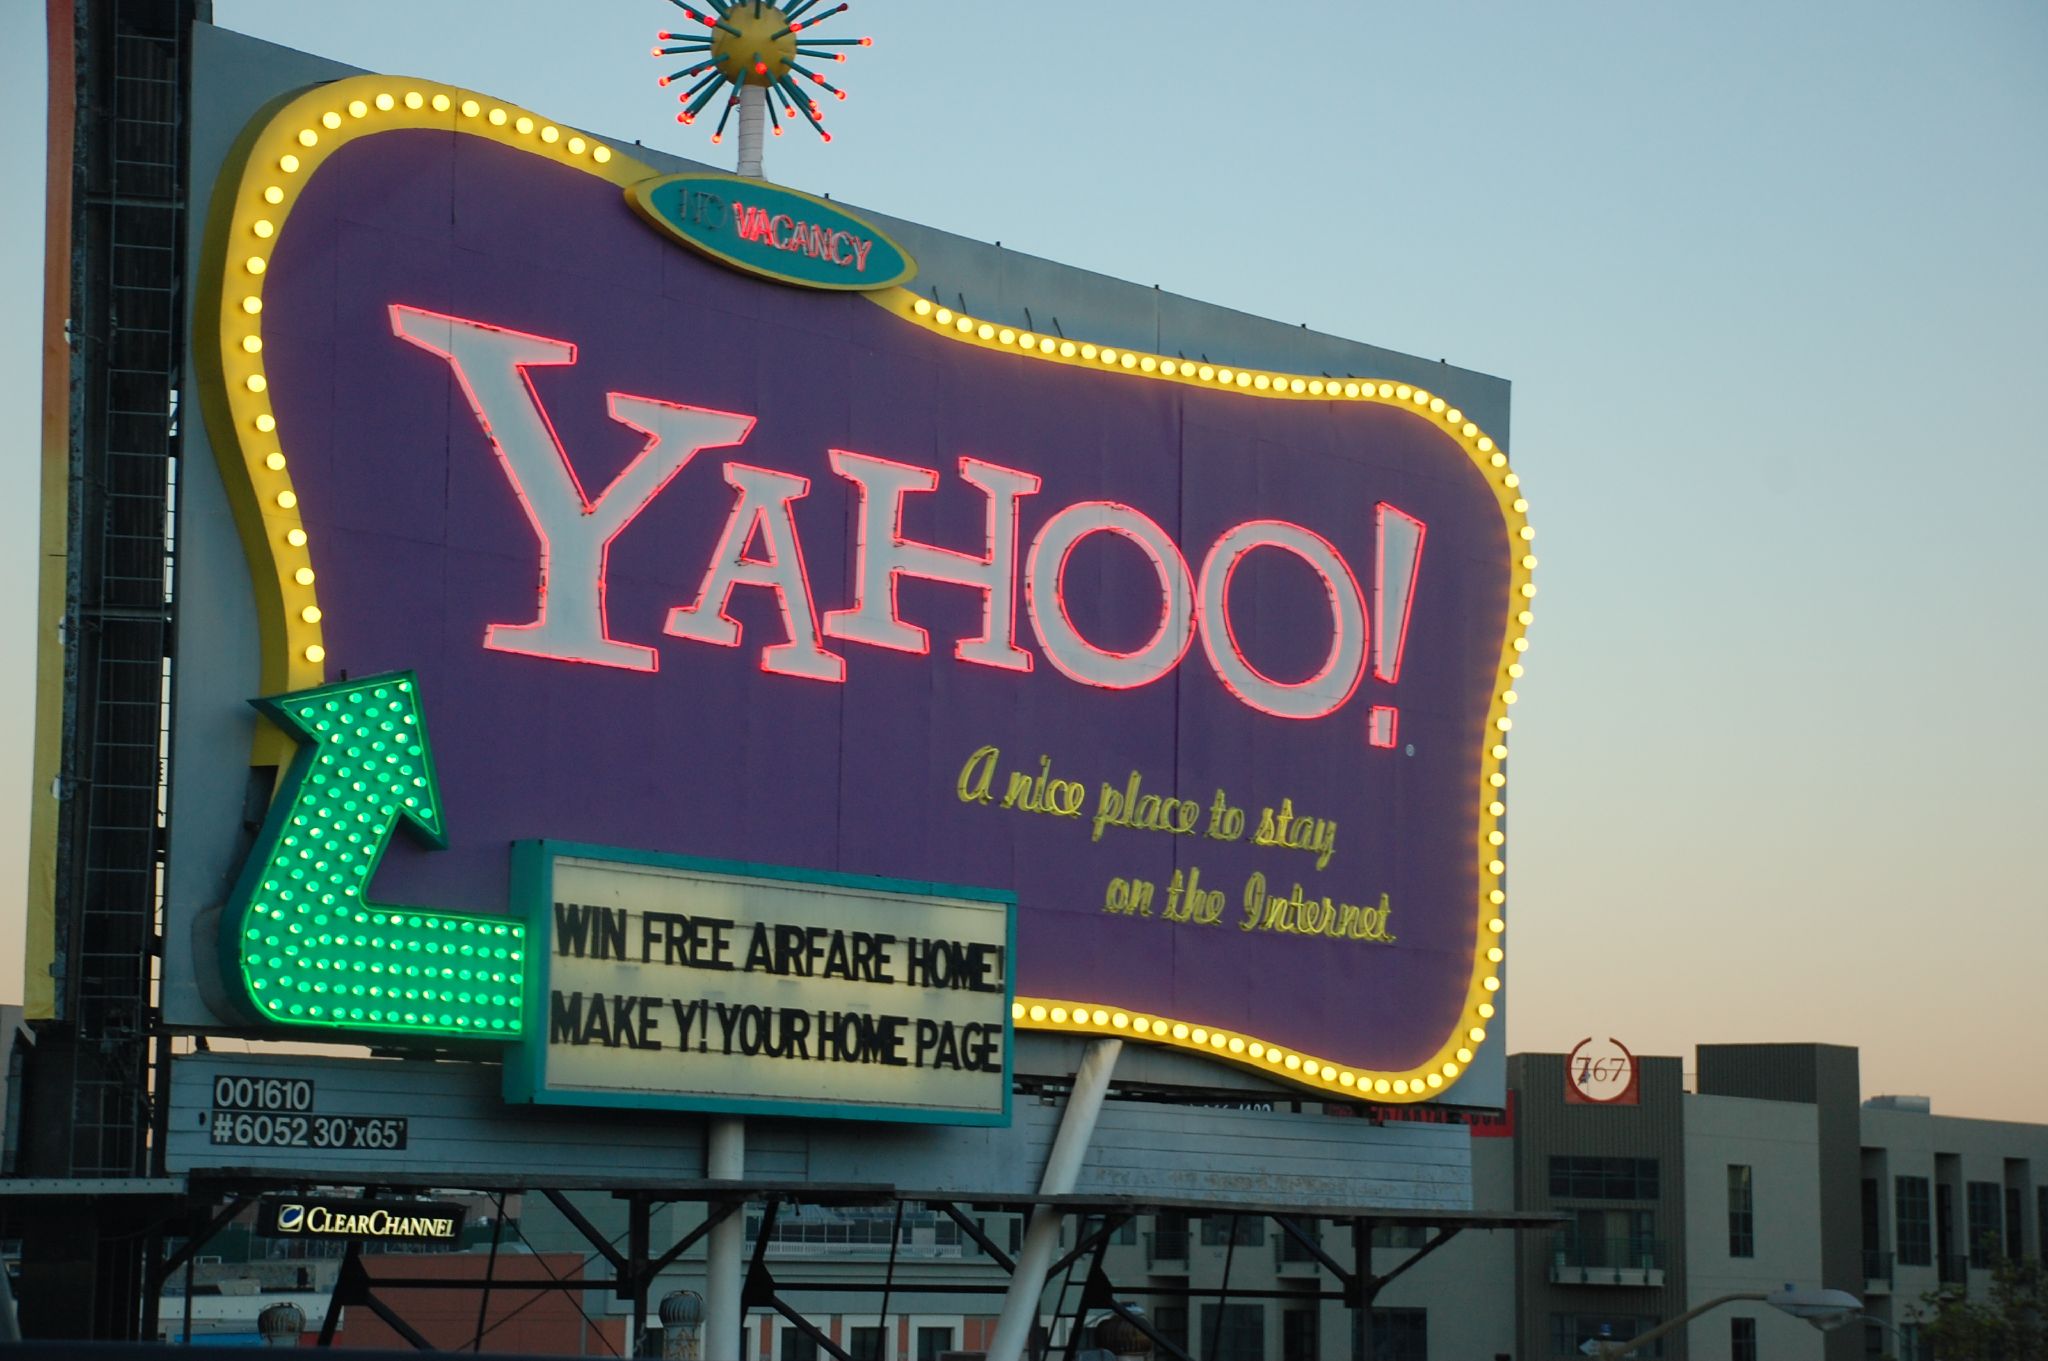 After four years, Google competitor Yahoo will be reclaiming its iconic billboard off the Interstate 80 in San Francisco. Photo by Peanutian.